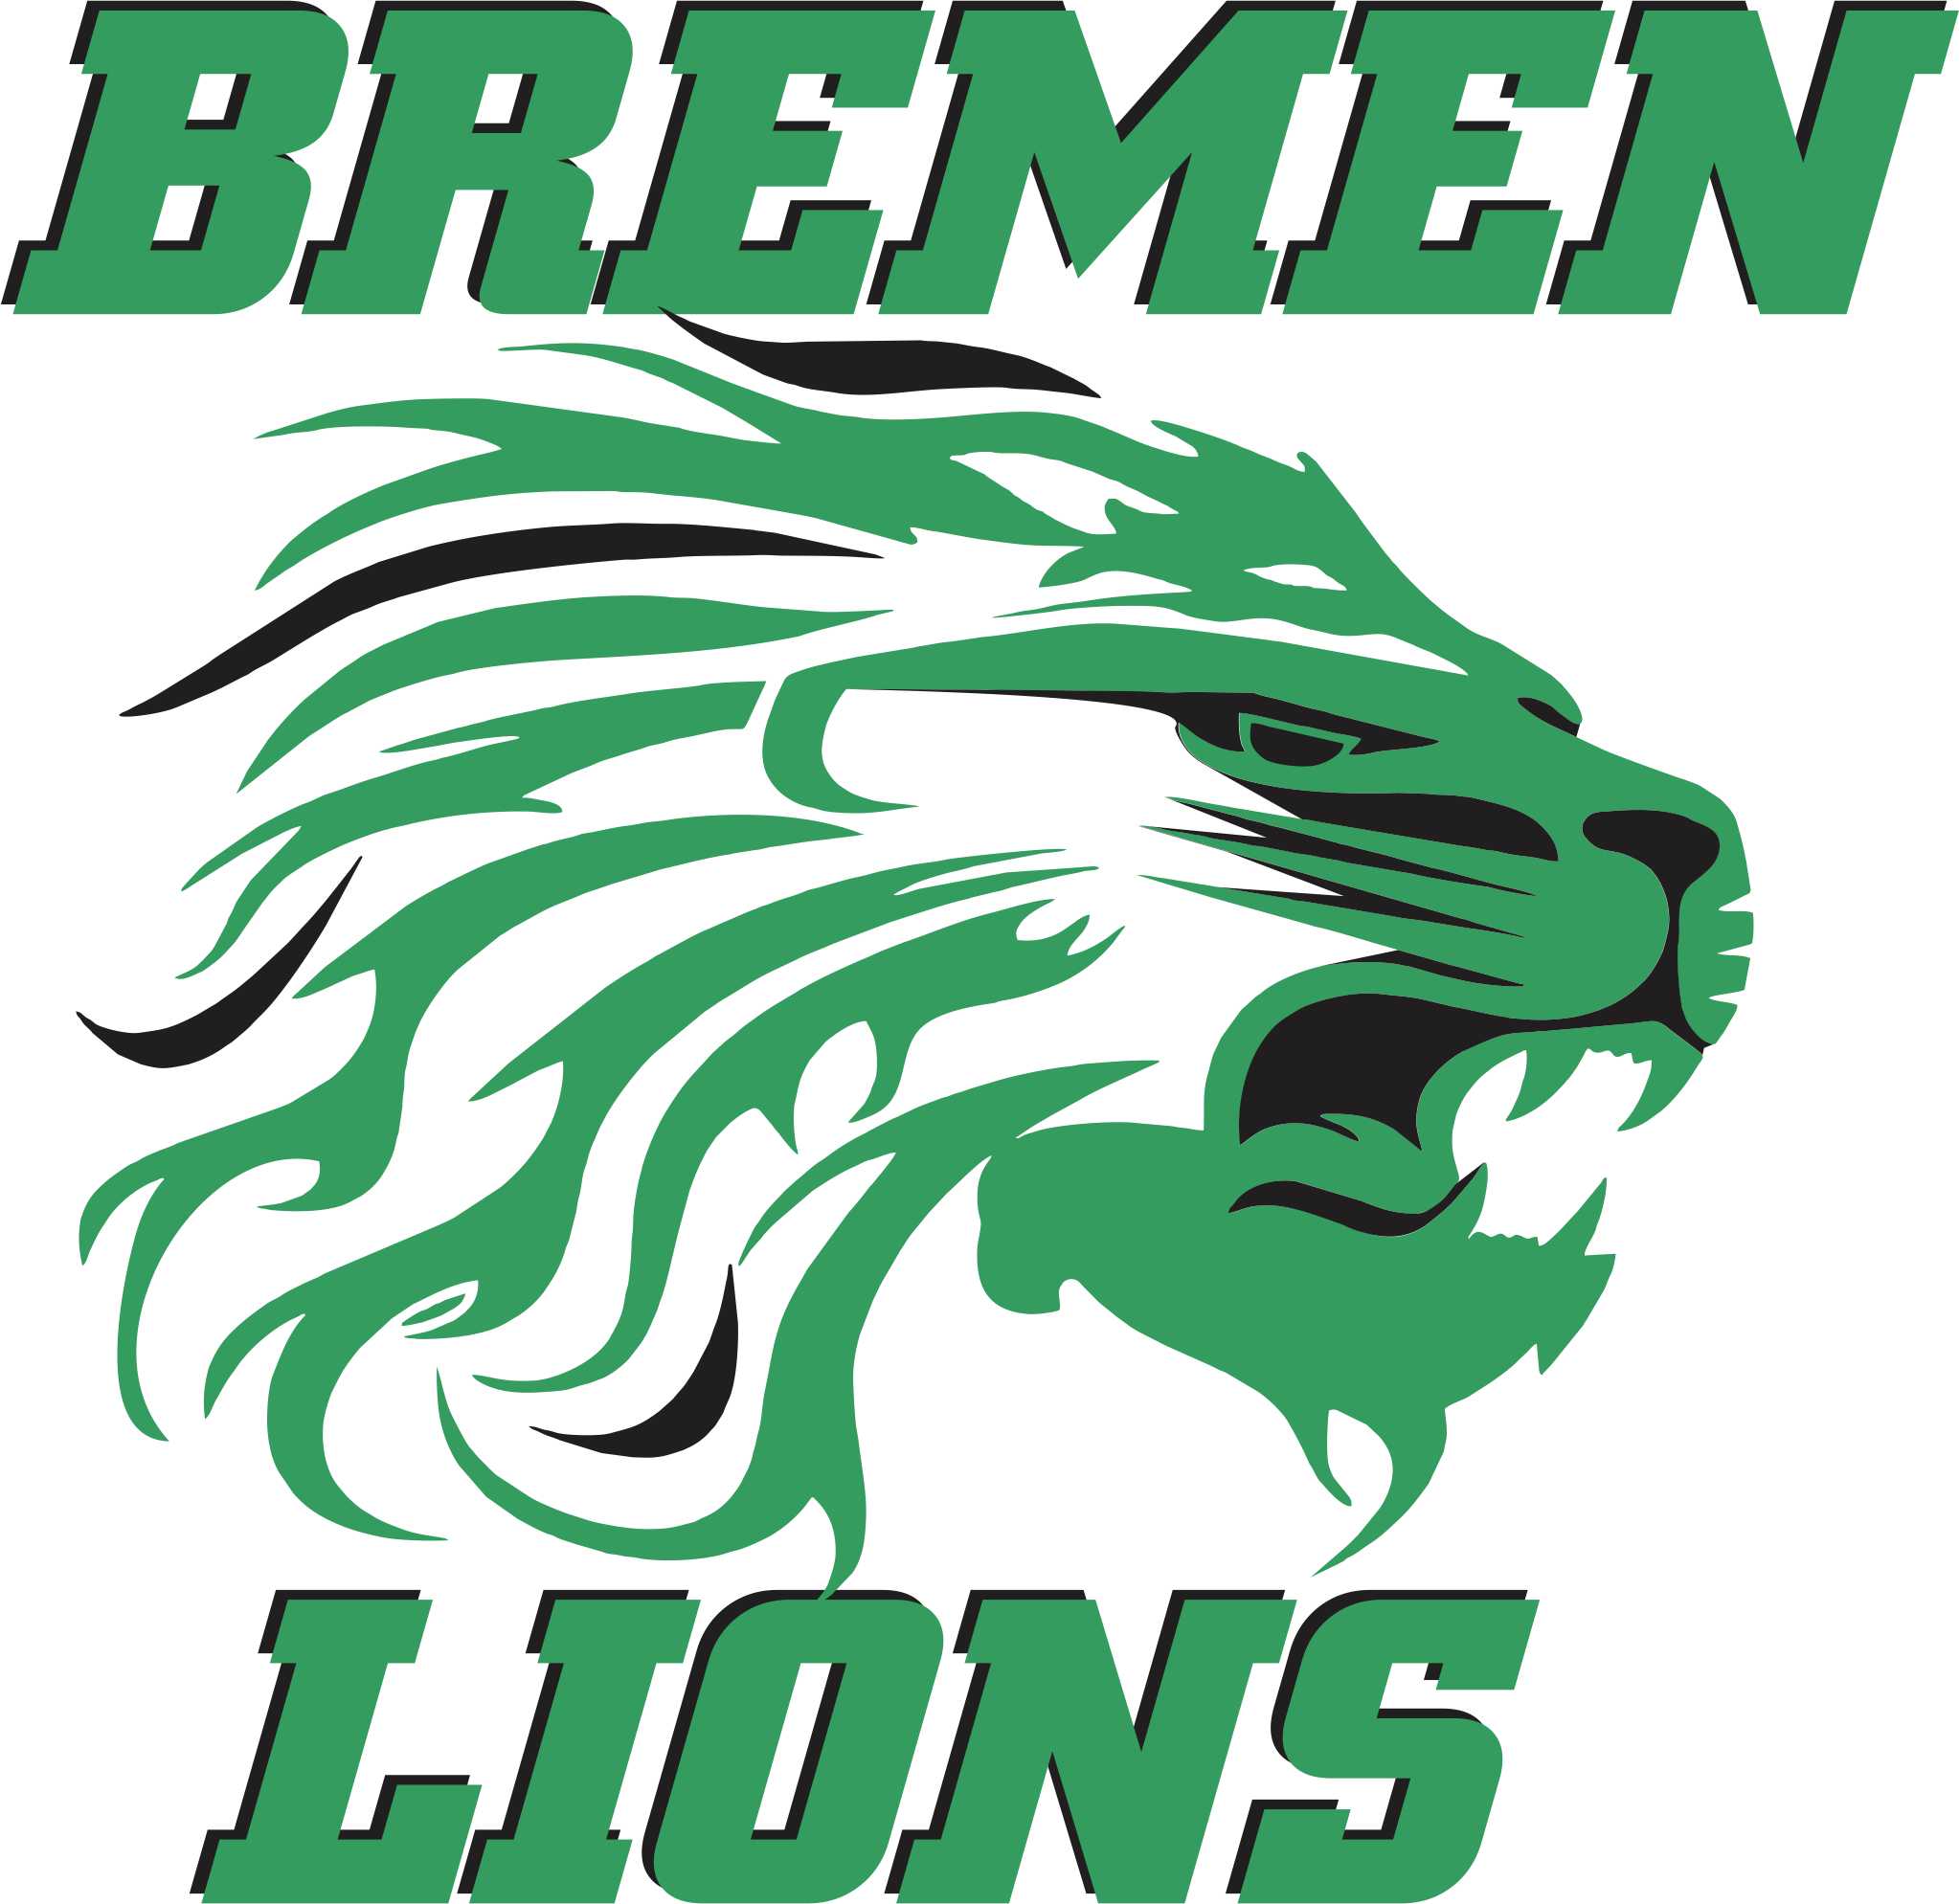 High School Lion Mascot Logo - Franko Design, Concepts, and Consulting for Brand and Image Bremen ...